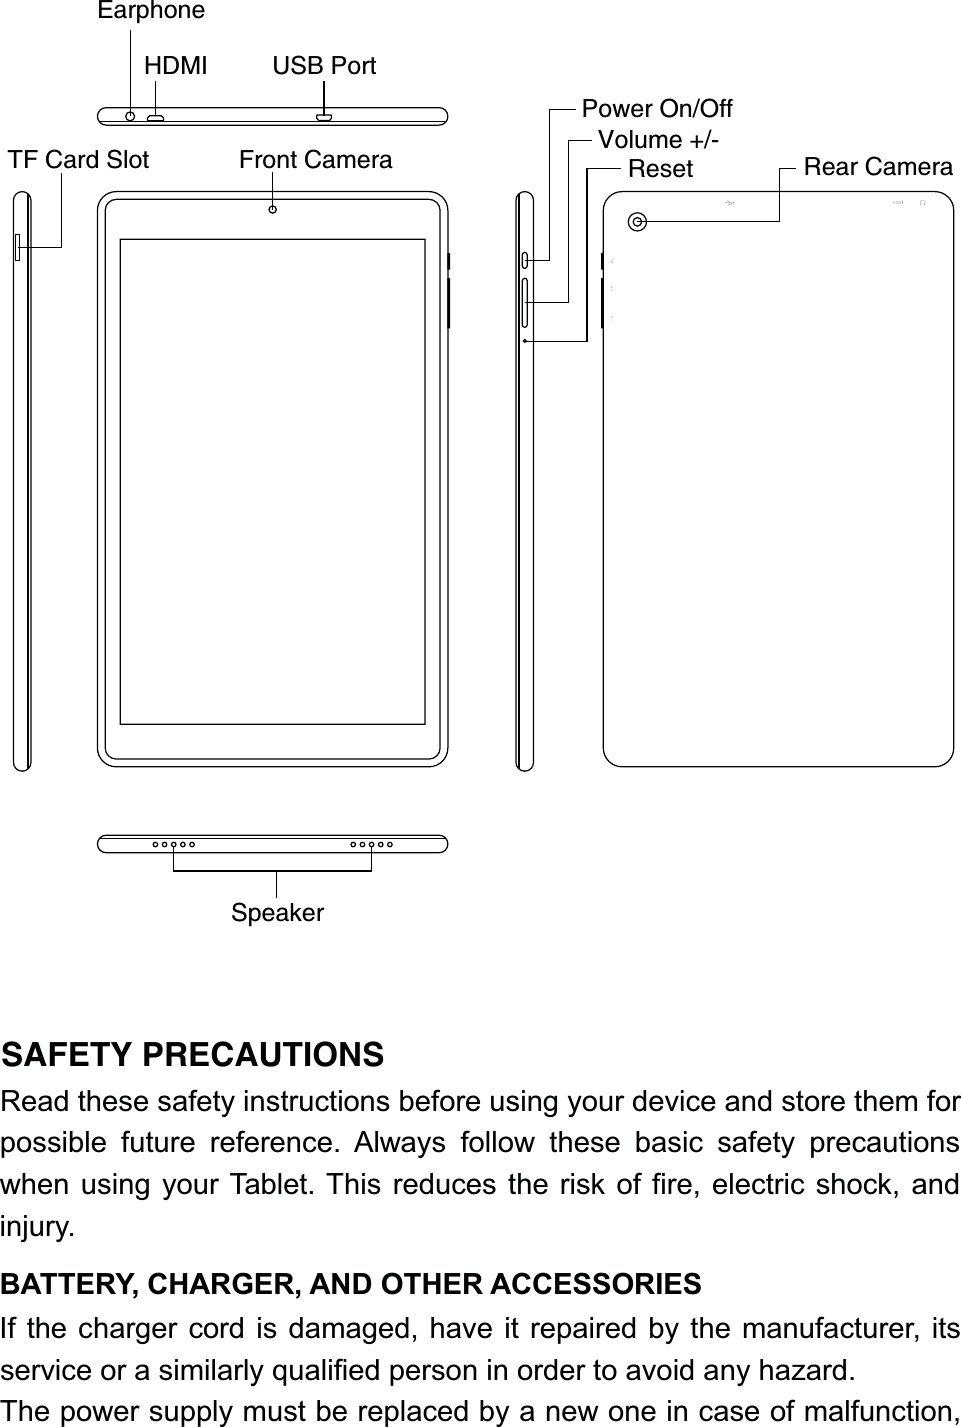 Read these safety instructions before using your device and store them forpossible future reference. Always follow these basic safety precautionswhen using your Tablet. This reduces the risk of fire, electric shock, andinjury.BATTERY, CHARGER, AND OTHER ACCESSORIESIf the charger cord is damaged, have it repaired by the manufacturer, itsservice or a similarly qualified person in order to avoid any hazard.The power supply must be replaced by a new one in case of malfunction,SAFETY PRECAUTIONSPower On/OffVolume +/-Front Camera Rear CameraEarphoneUSB PortHDMI ResetTF Card SlotSpeaker